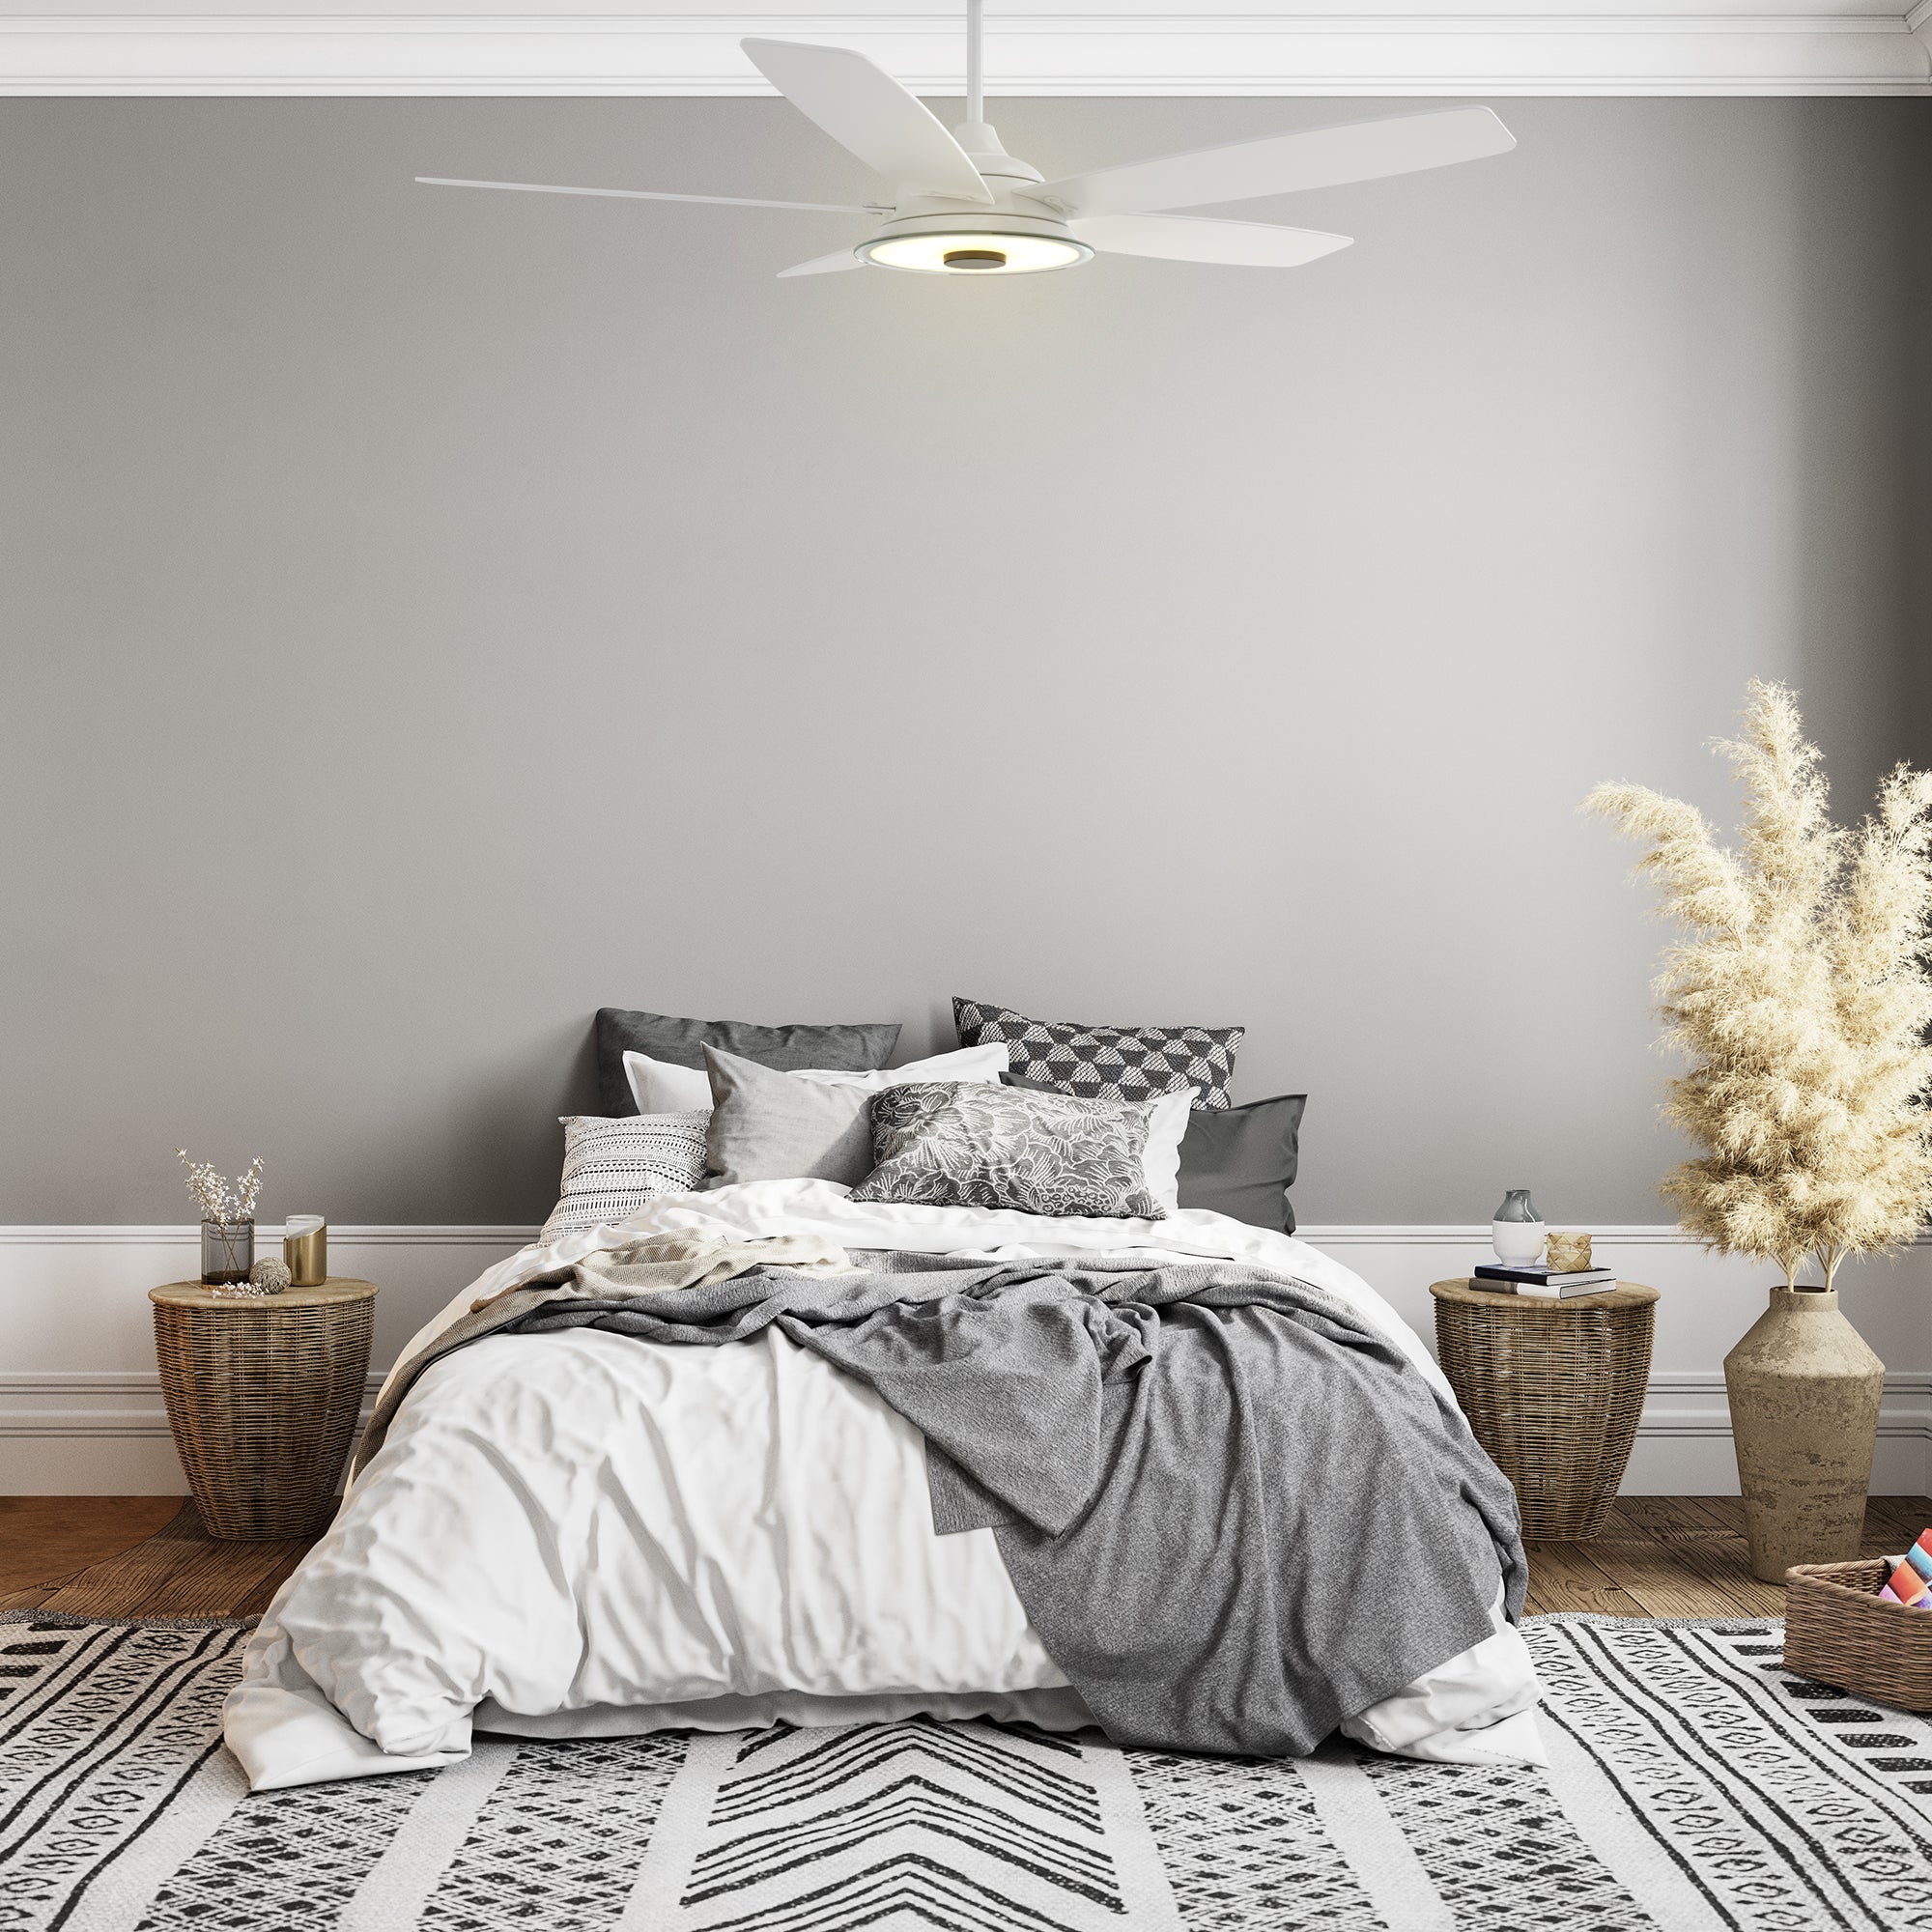 The Smafan Striker 52&#39;&#39; Smart Fan will blend beautifully in any décor trend. Six different airfoil color options, dimmable Led light perfectly matches your space. Compatible with Amazon Alexa and Google Assistant and Siri, Striker helps you control your fan with the phone app, remote, and voice command.